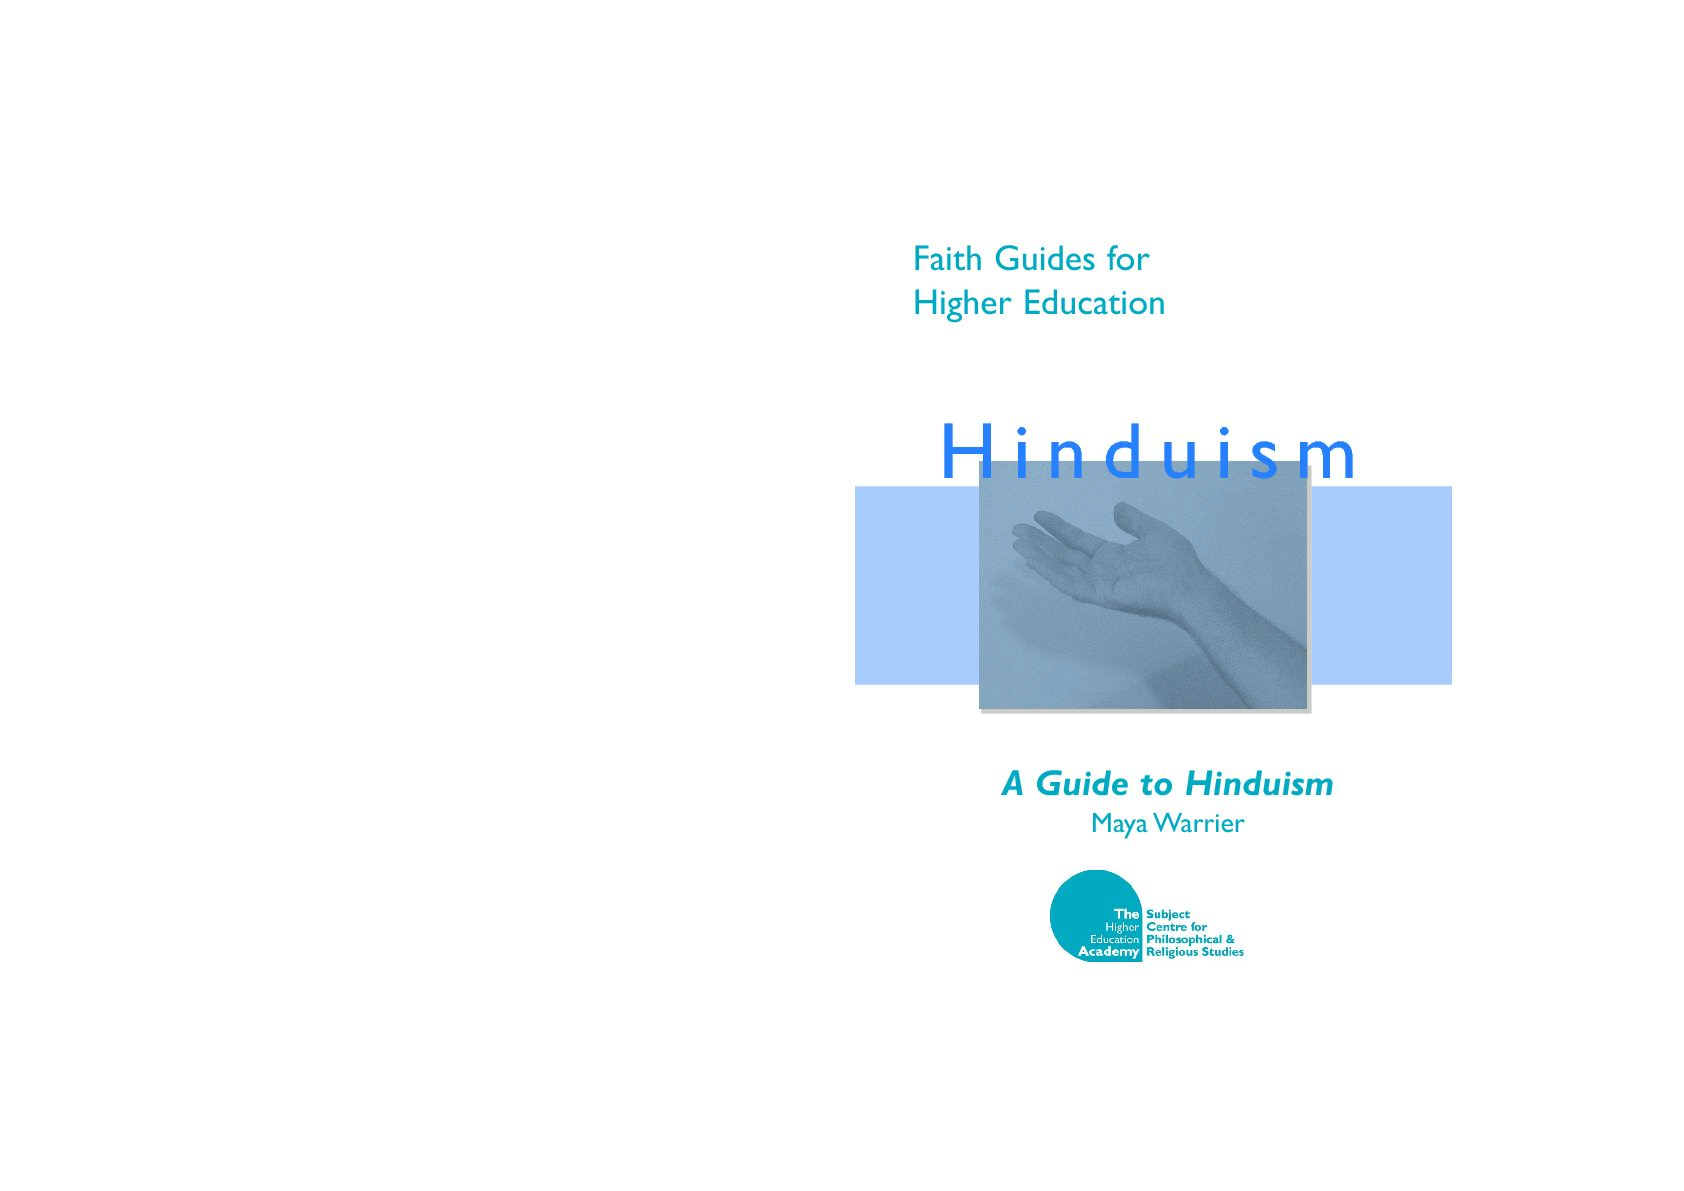 [PDF] Faith Guides for Higher Education: A Guide to Hinduism